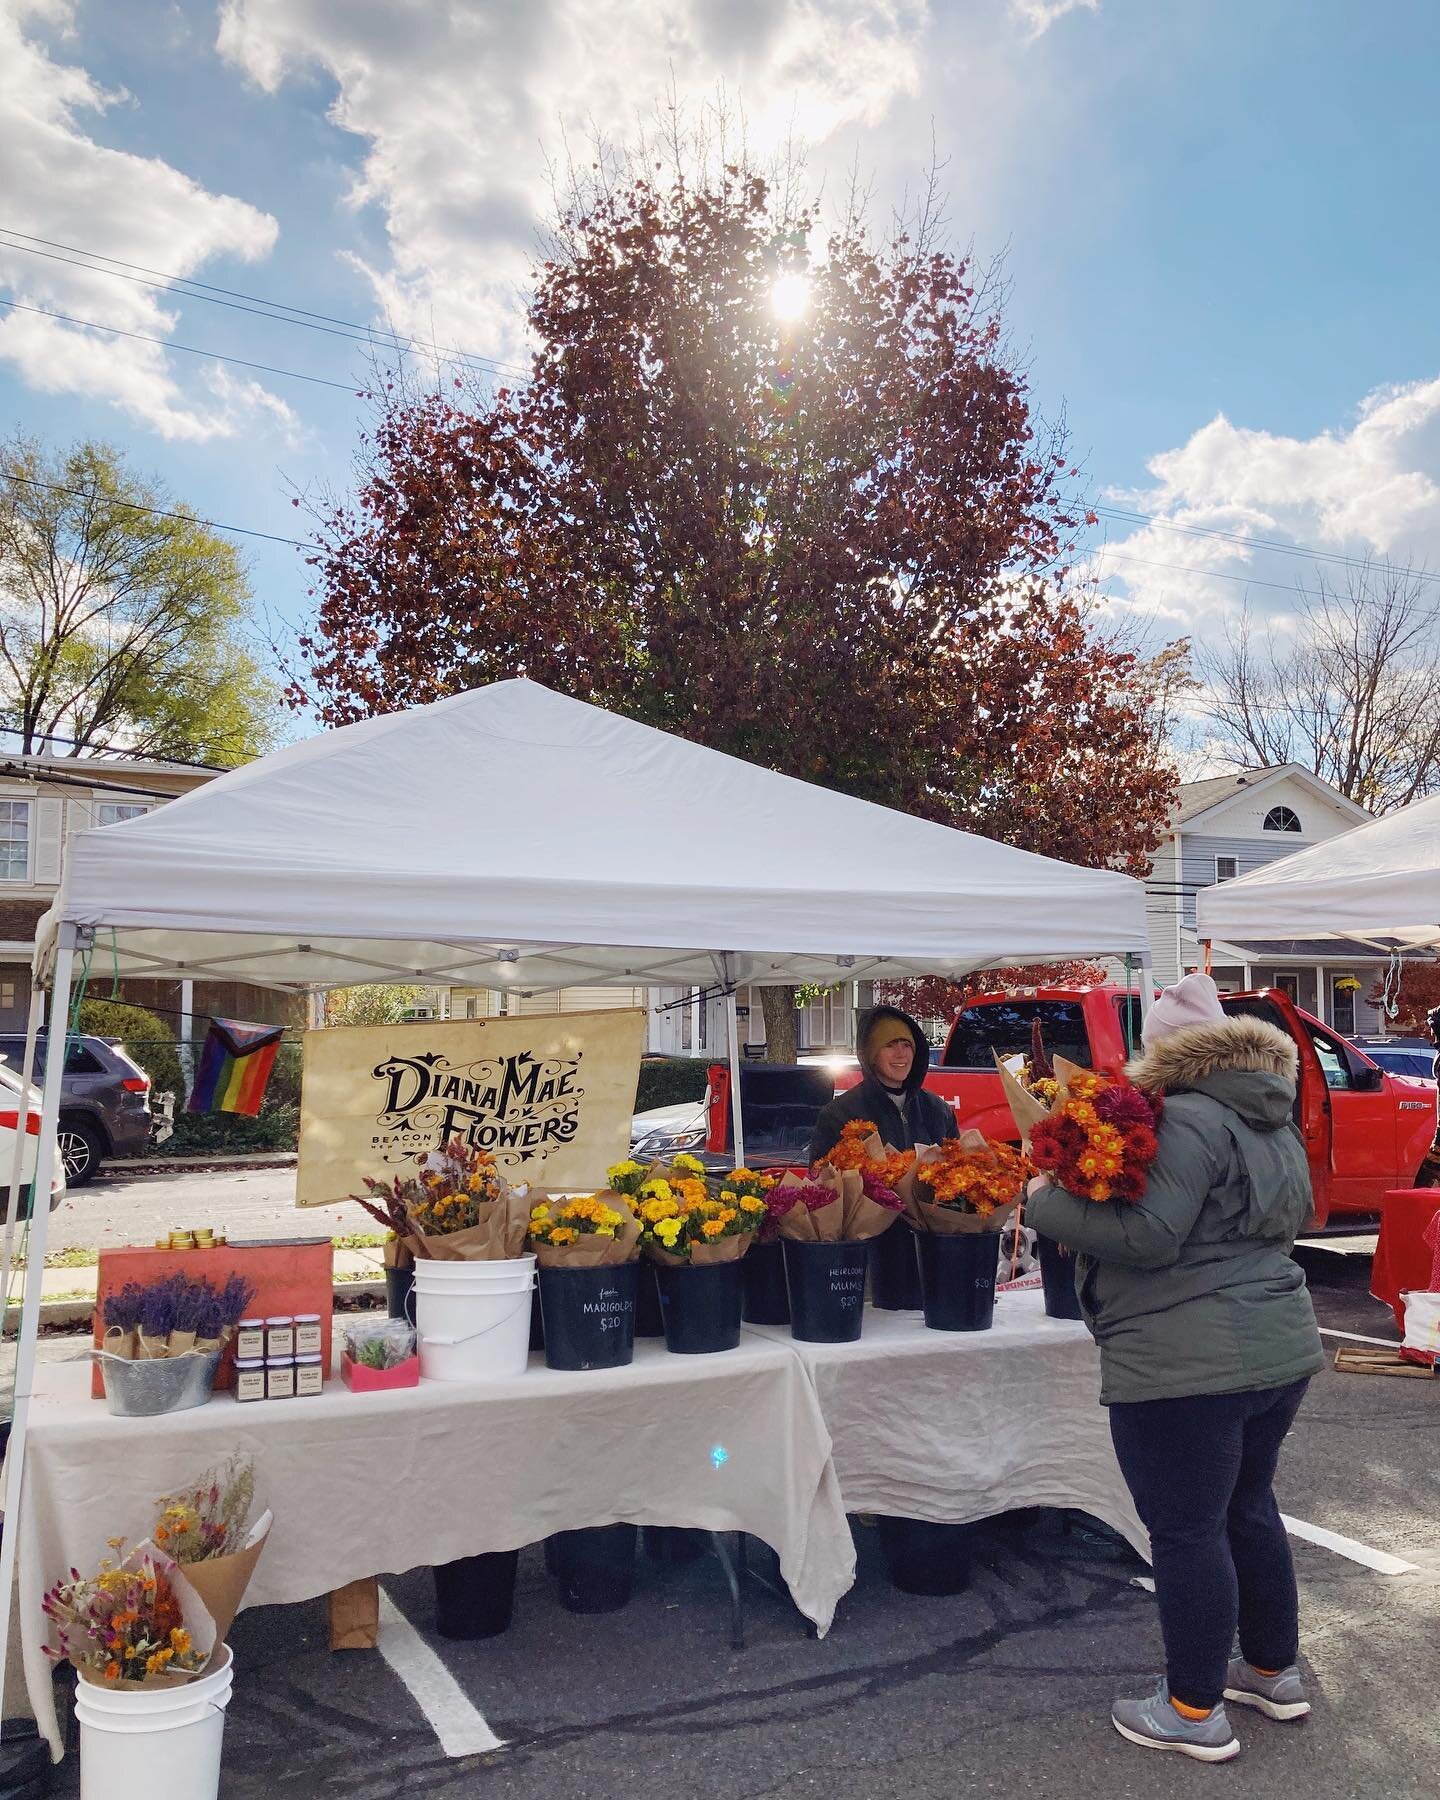 It&rsquo;s your LAST CHANCE to snag fresh flowers this season! 🍁 Hudson Valley grown flowers for your November table Sunday @beaconfarmersmarket 10&mdash;3pm!

PLUS 
💐 Everlasting dried bouquets 
🍵 Herbal read grown, harvested, and dried fresh fro